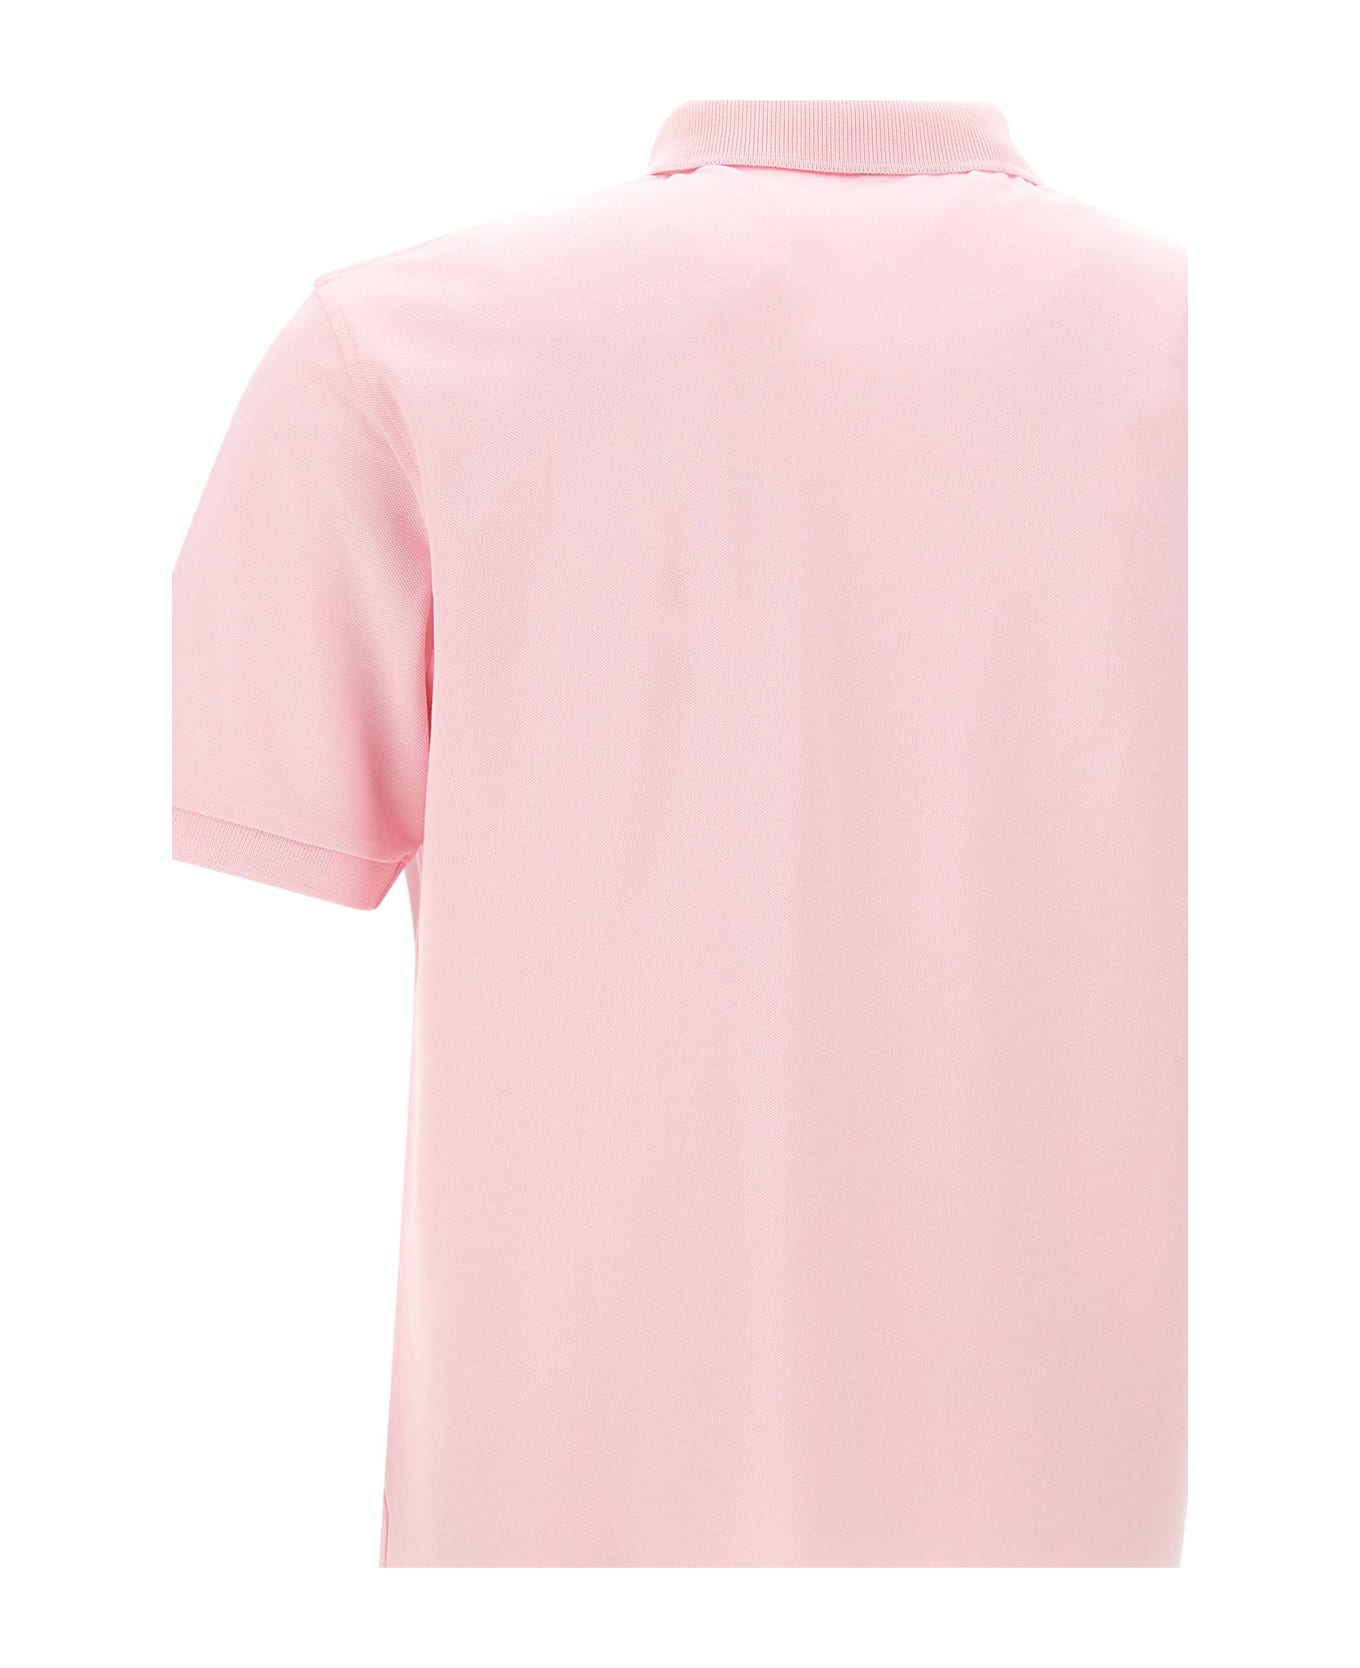 Sun 68 "solid" Pique Cotton Polo Shirt - PINK ポロシャツ